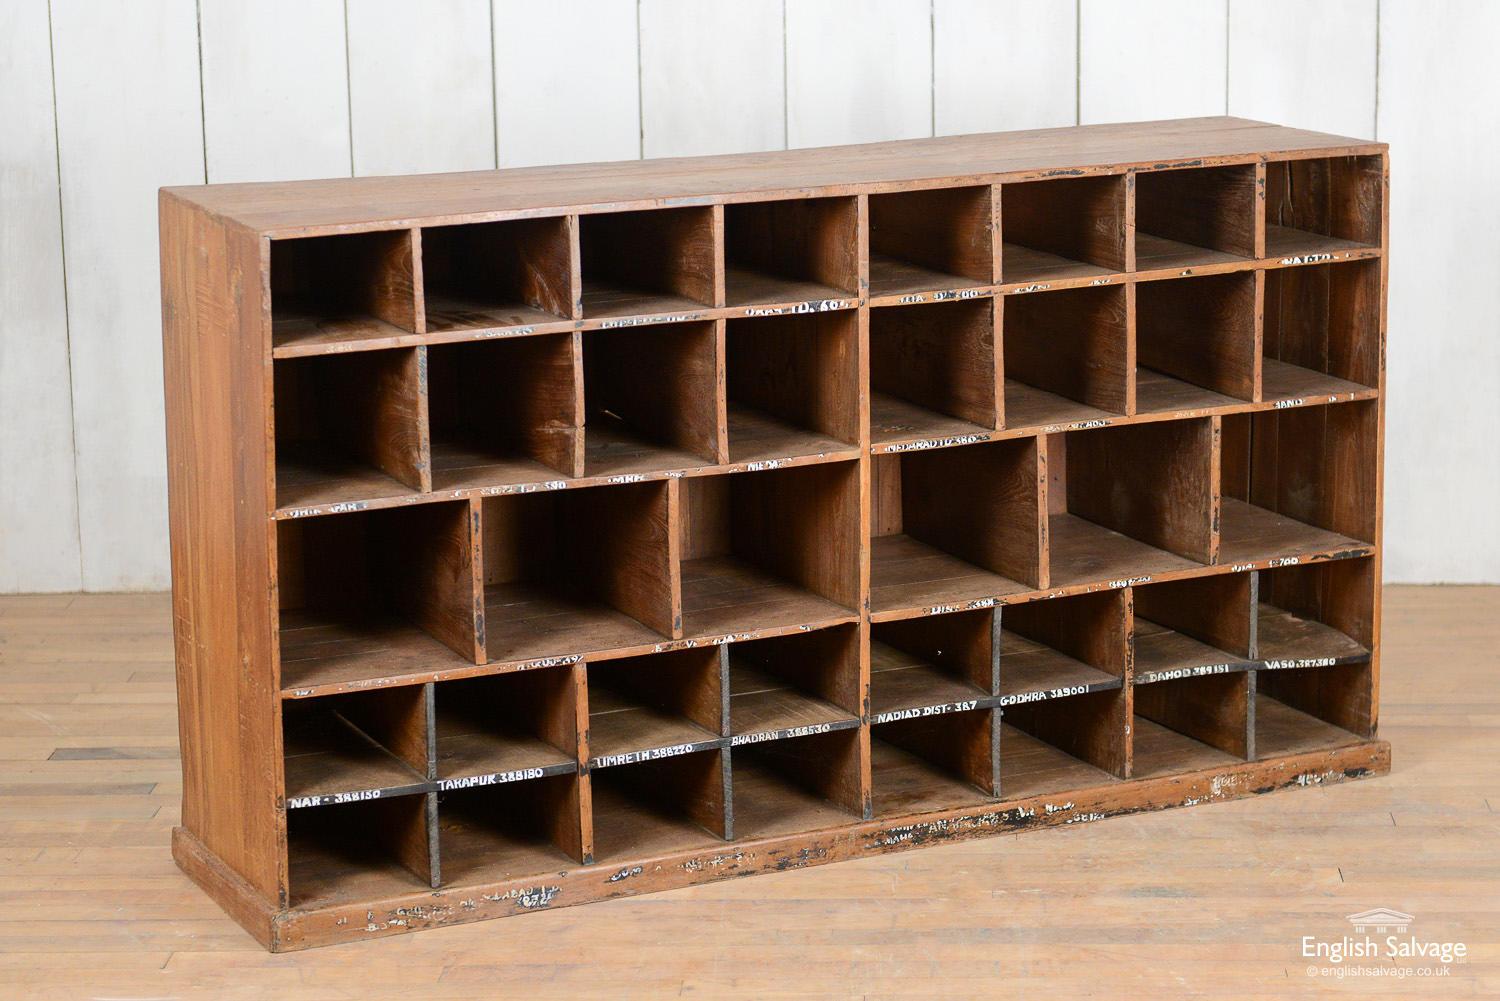 Rustic wooden pigeon hole unit reclaimed from India. This piece of furniture provides useful storage with 38 pigeon holes, most of which have Indian place names hand written below. A few water marks, wear and tear present.